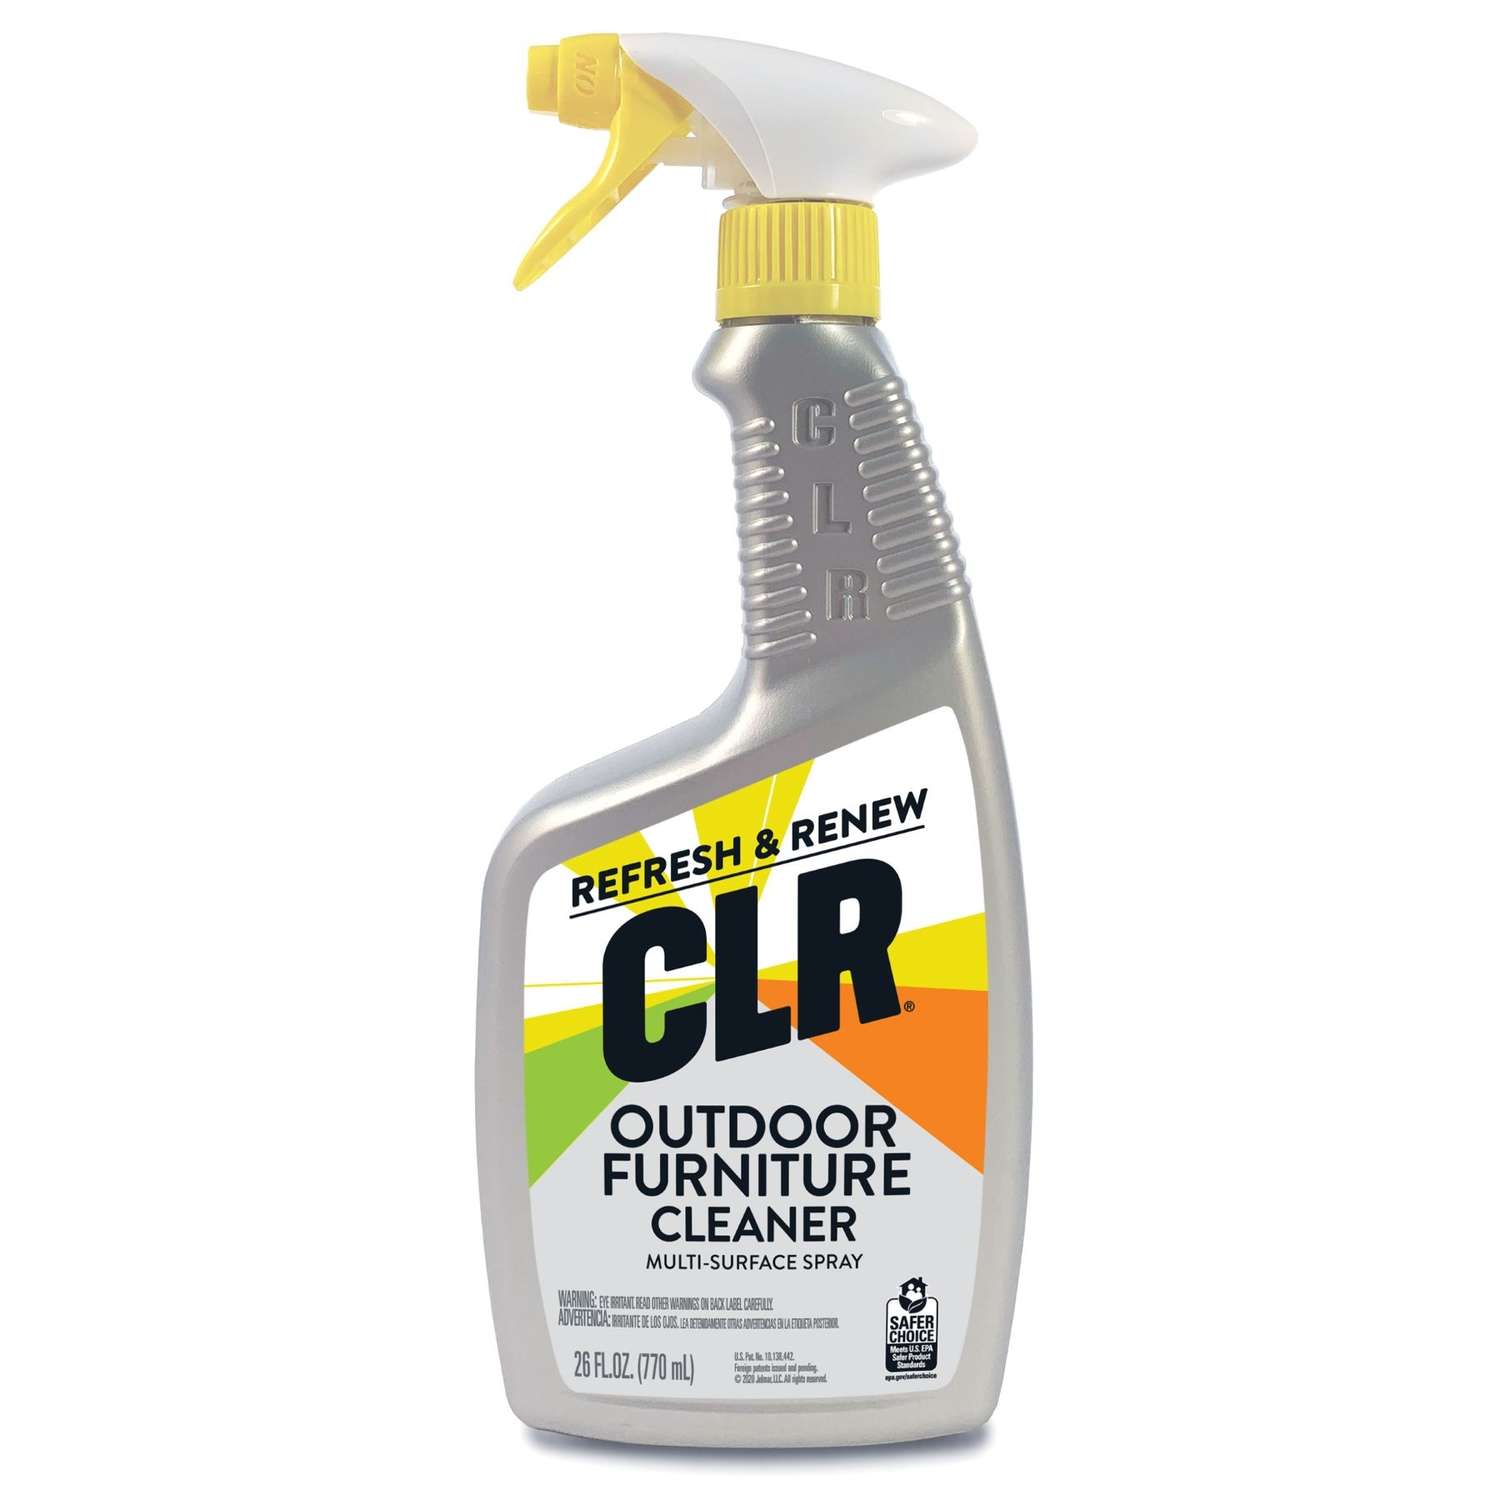 CLR No Scent Outdoor Furniture Cleaner  26 ounce oz Spray  